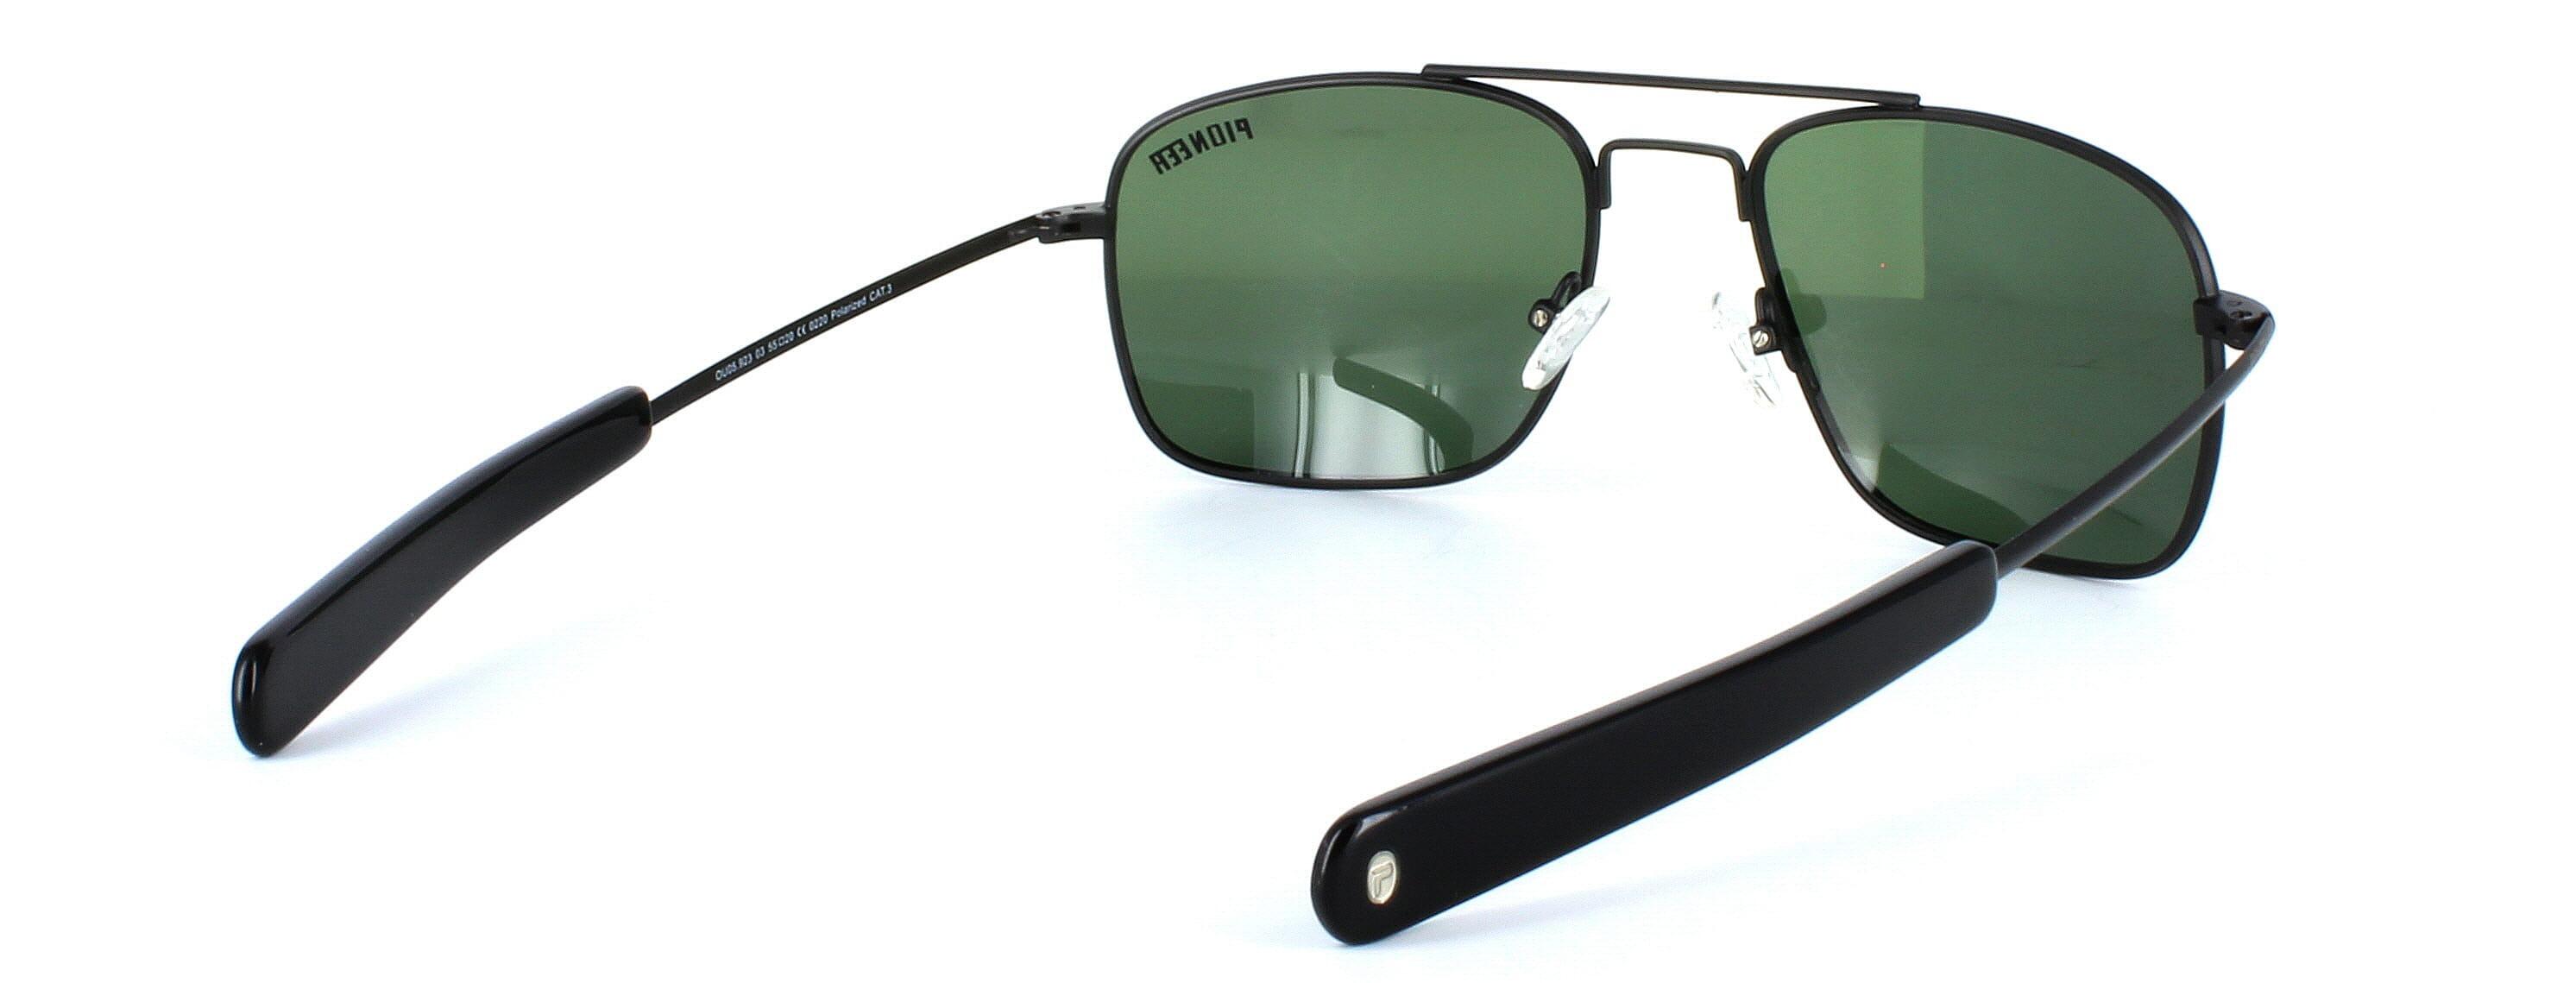 Tommaso - Gent's aviator style prescription sunglasses in black - choose green, brown or grey tints inc in the price - image view 4